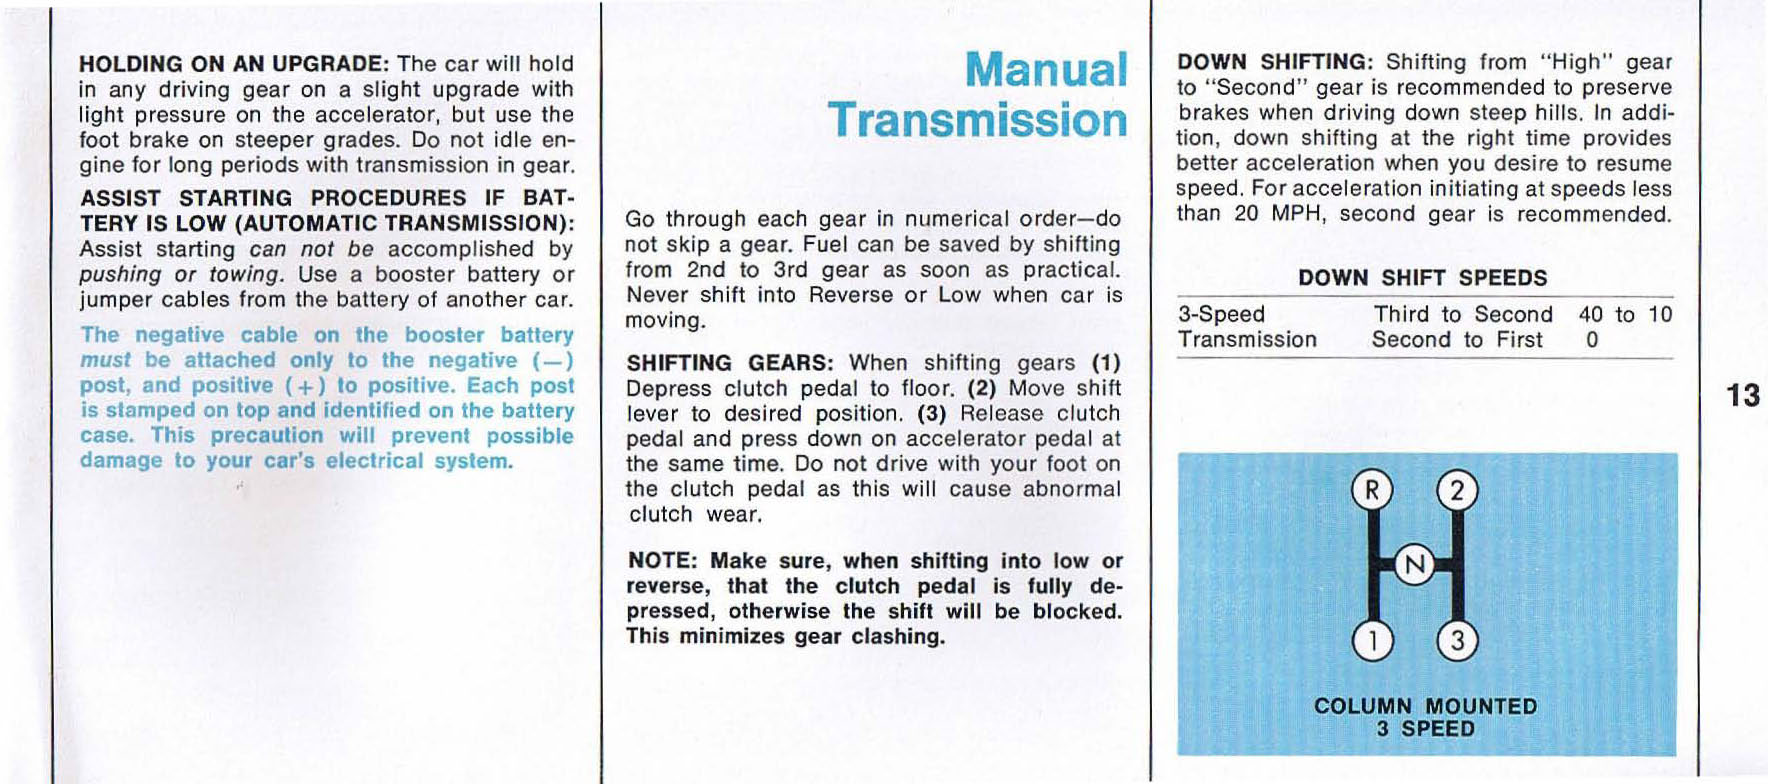 1969_Plymouth_Fury_Owners_Manual-13